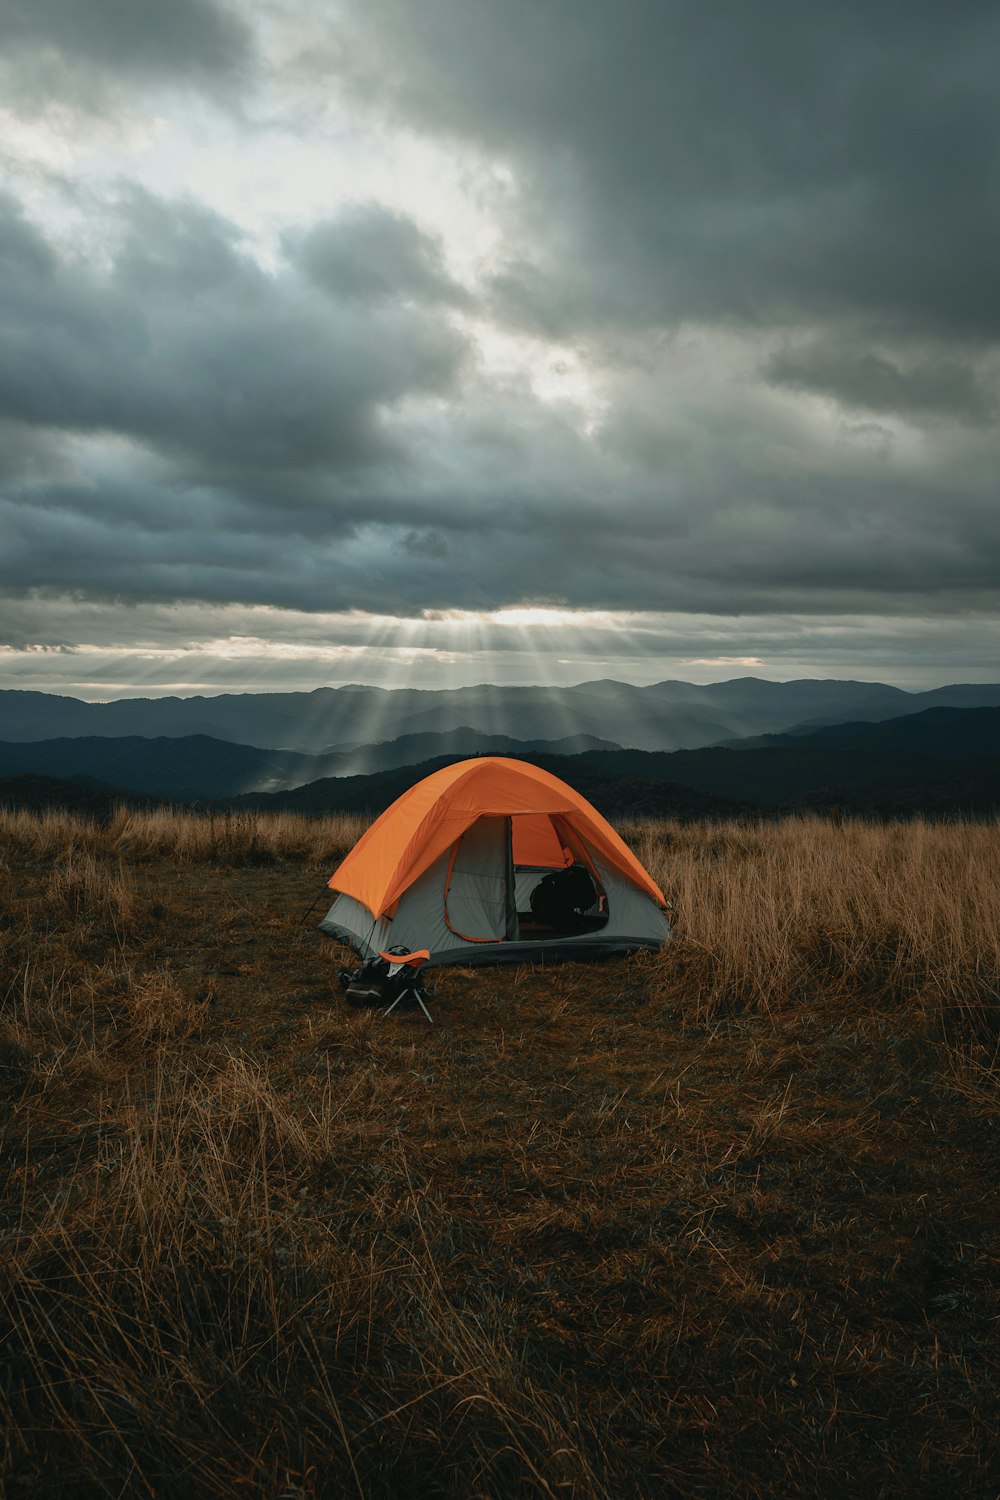 set-up gray and orange tent on brown field under cloudy sky